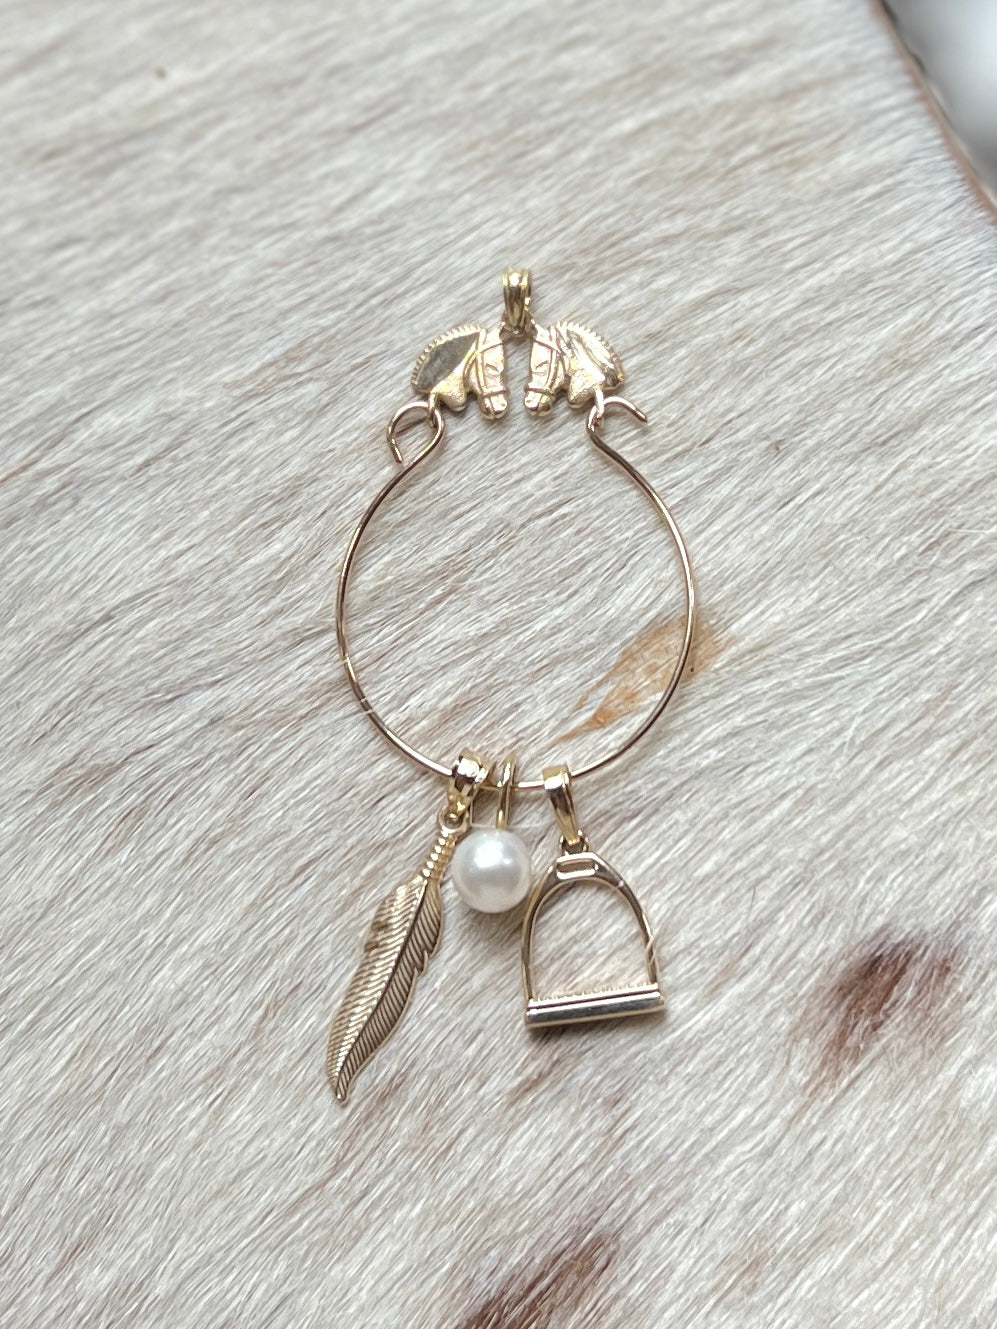 Feather charm